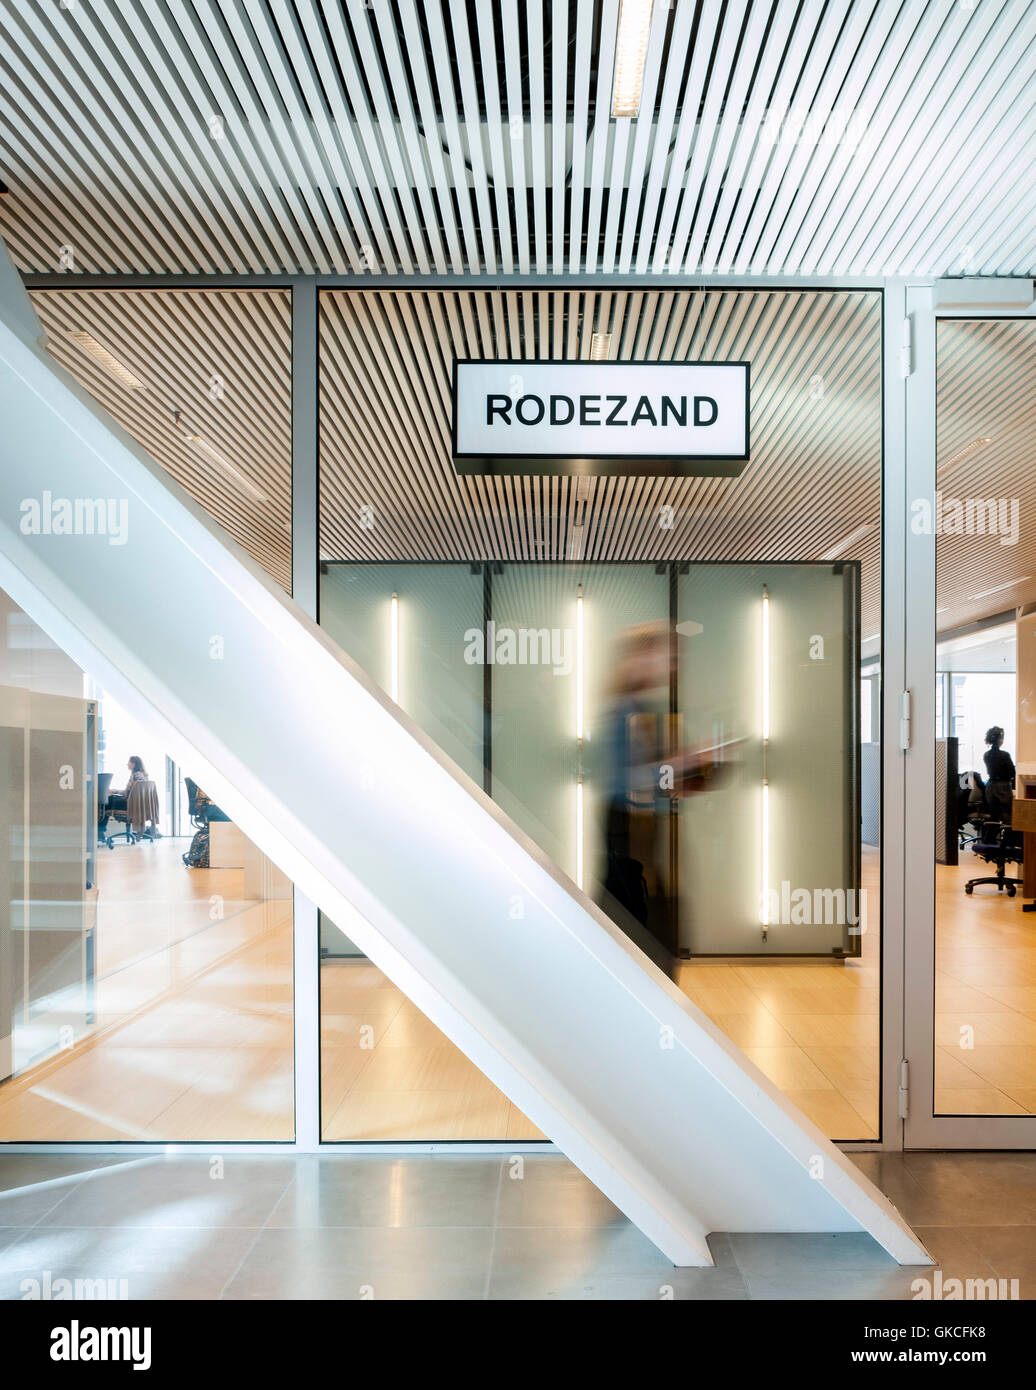 Detail showing entrace to office and white steel structural beam. Timmerhuis, Rotterdam, Netherlands. Architect: OMA Rem Koolhaas, 2015. Stock Photo